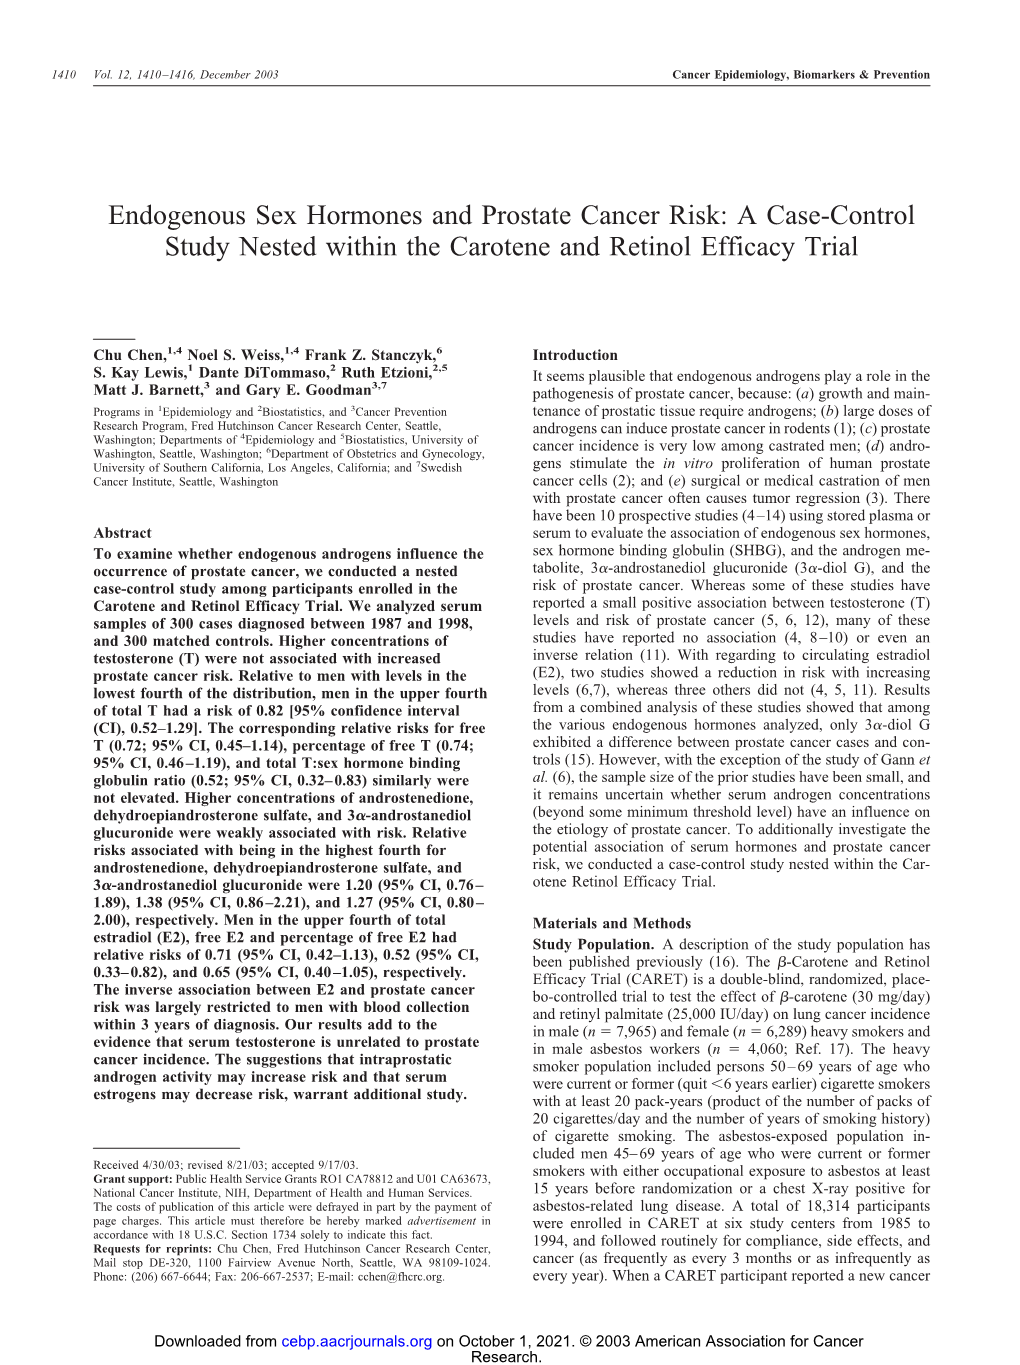 Endogenous Sex Hormones and Prostate Cancer Risk: a Case-Control Study Nested Within the Carotene and Retinol Efficacy Trial